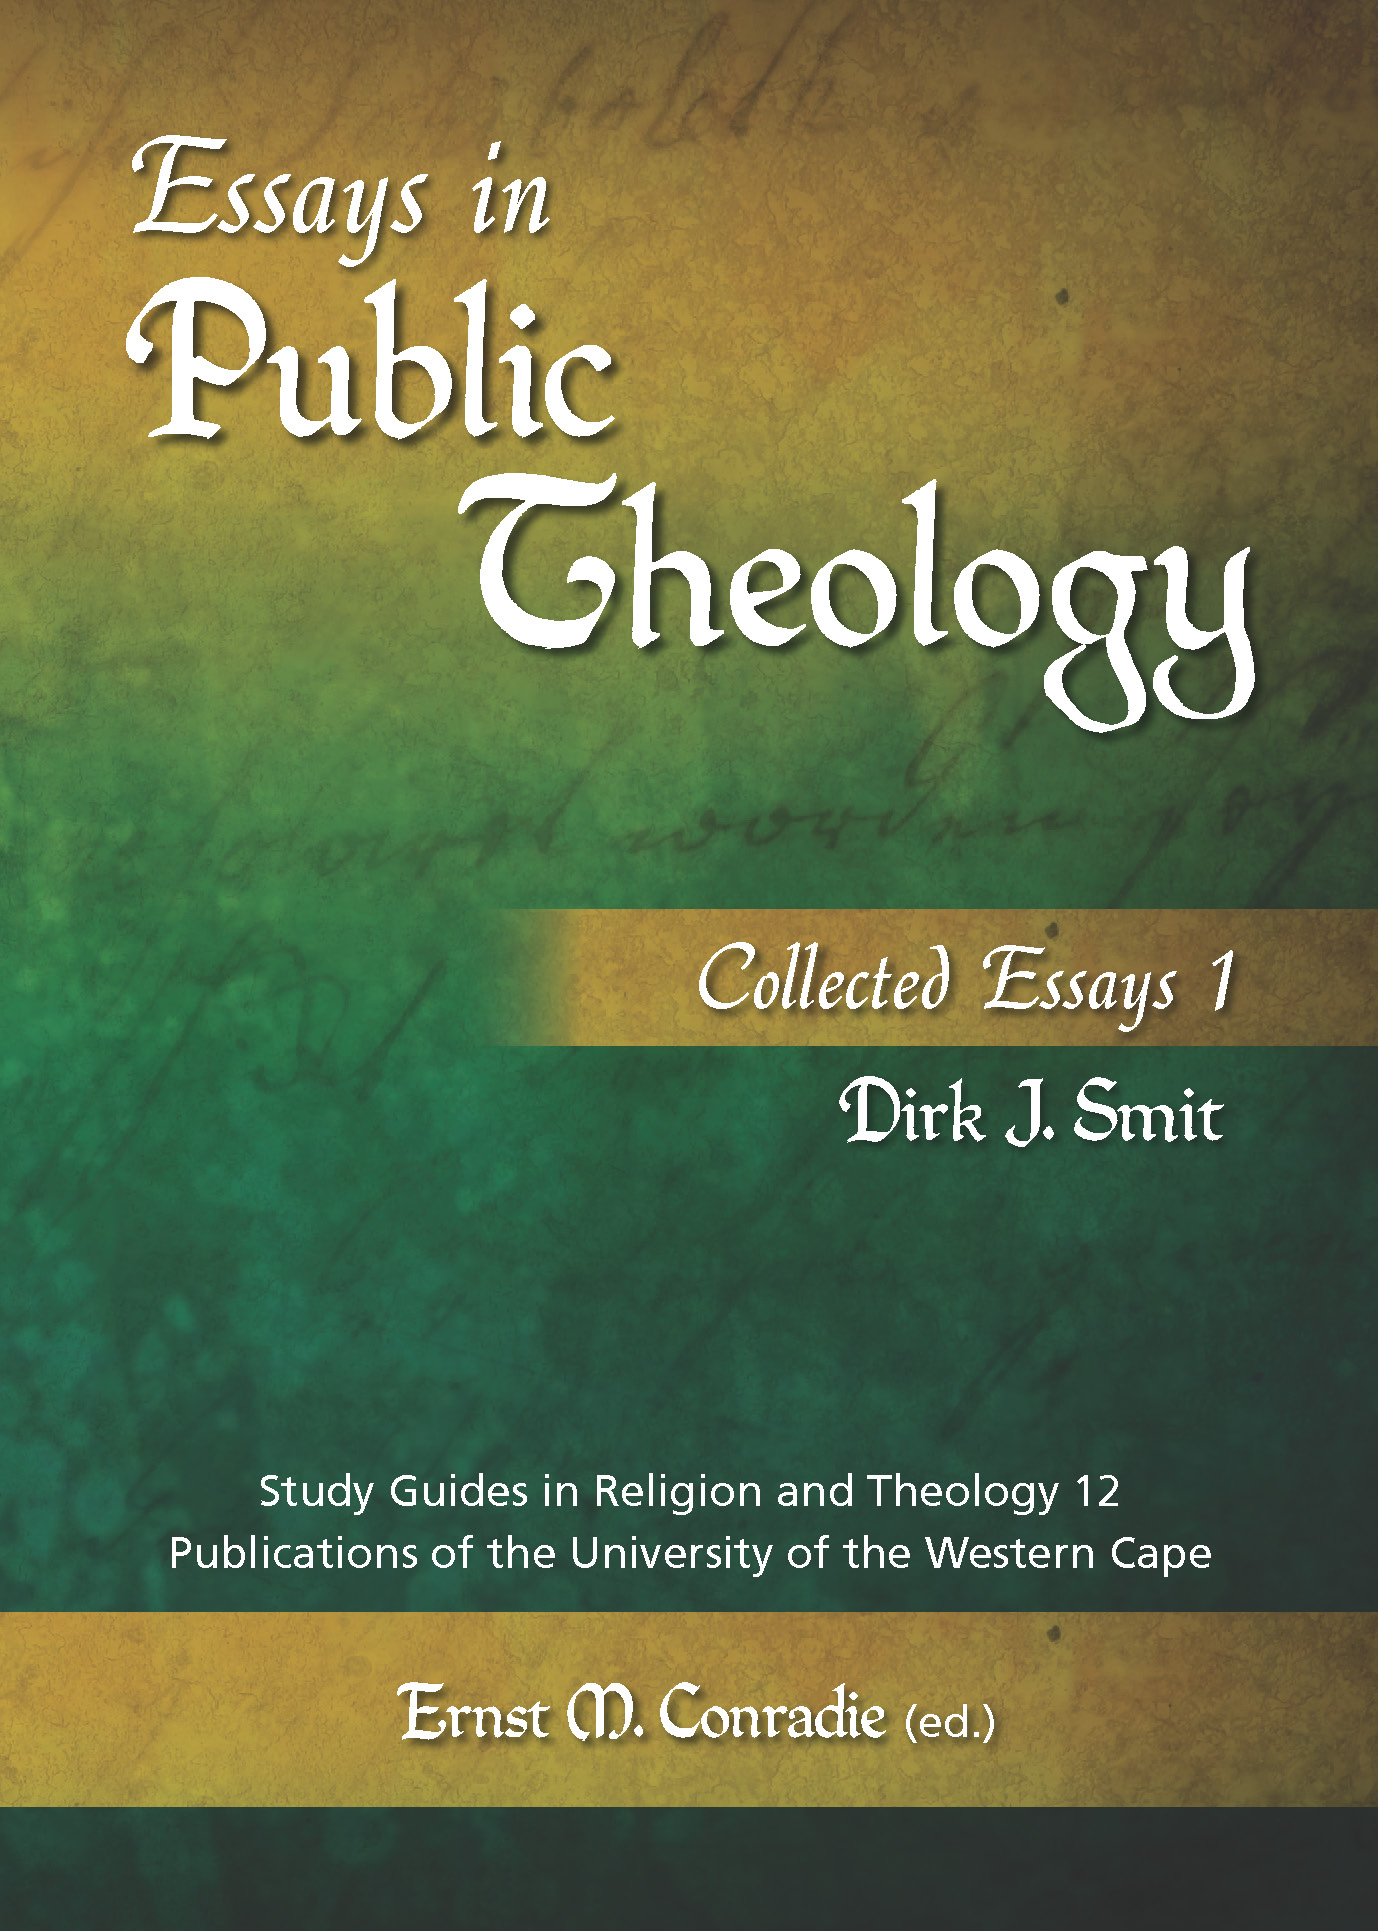 Essays 1 COVER front.jpg